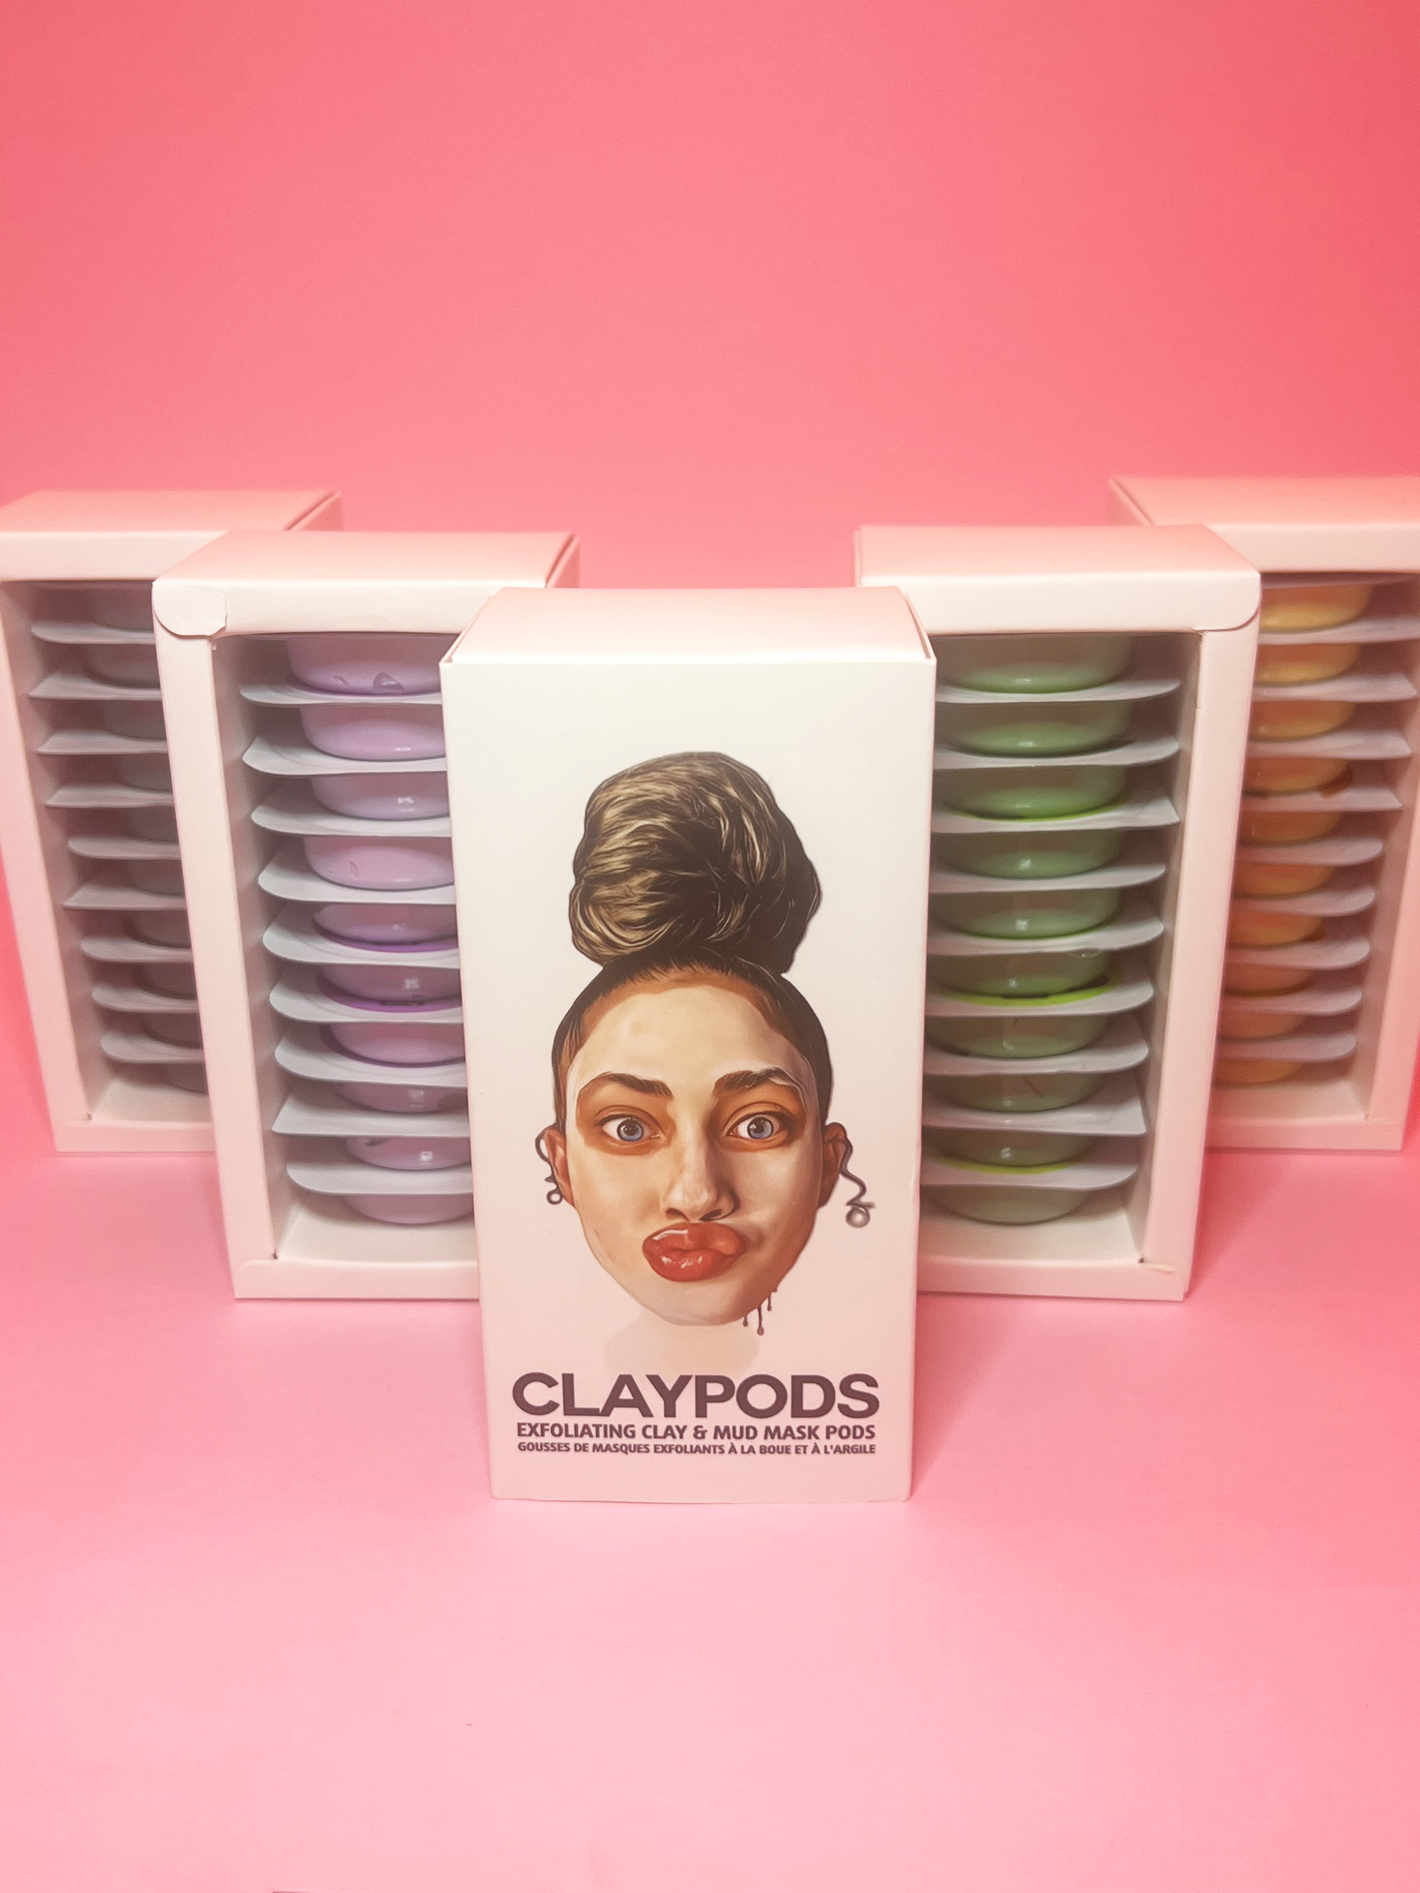 Clay pod blends, Avocado, Eggplant, Dead Sea, Turmeric on a pink background. Main box of clay ponds in front